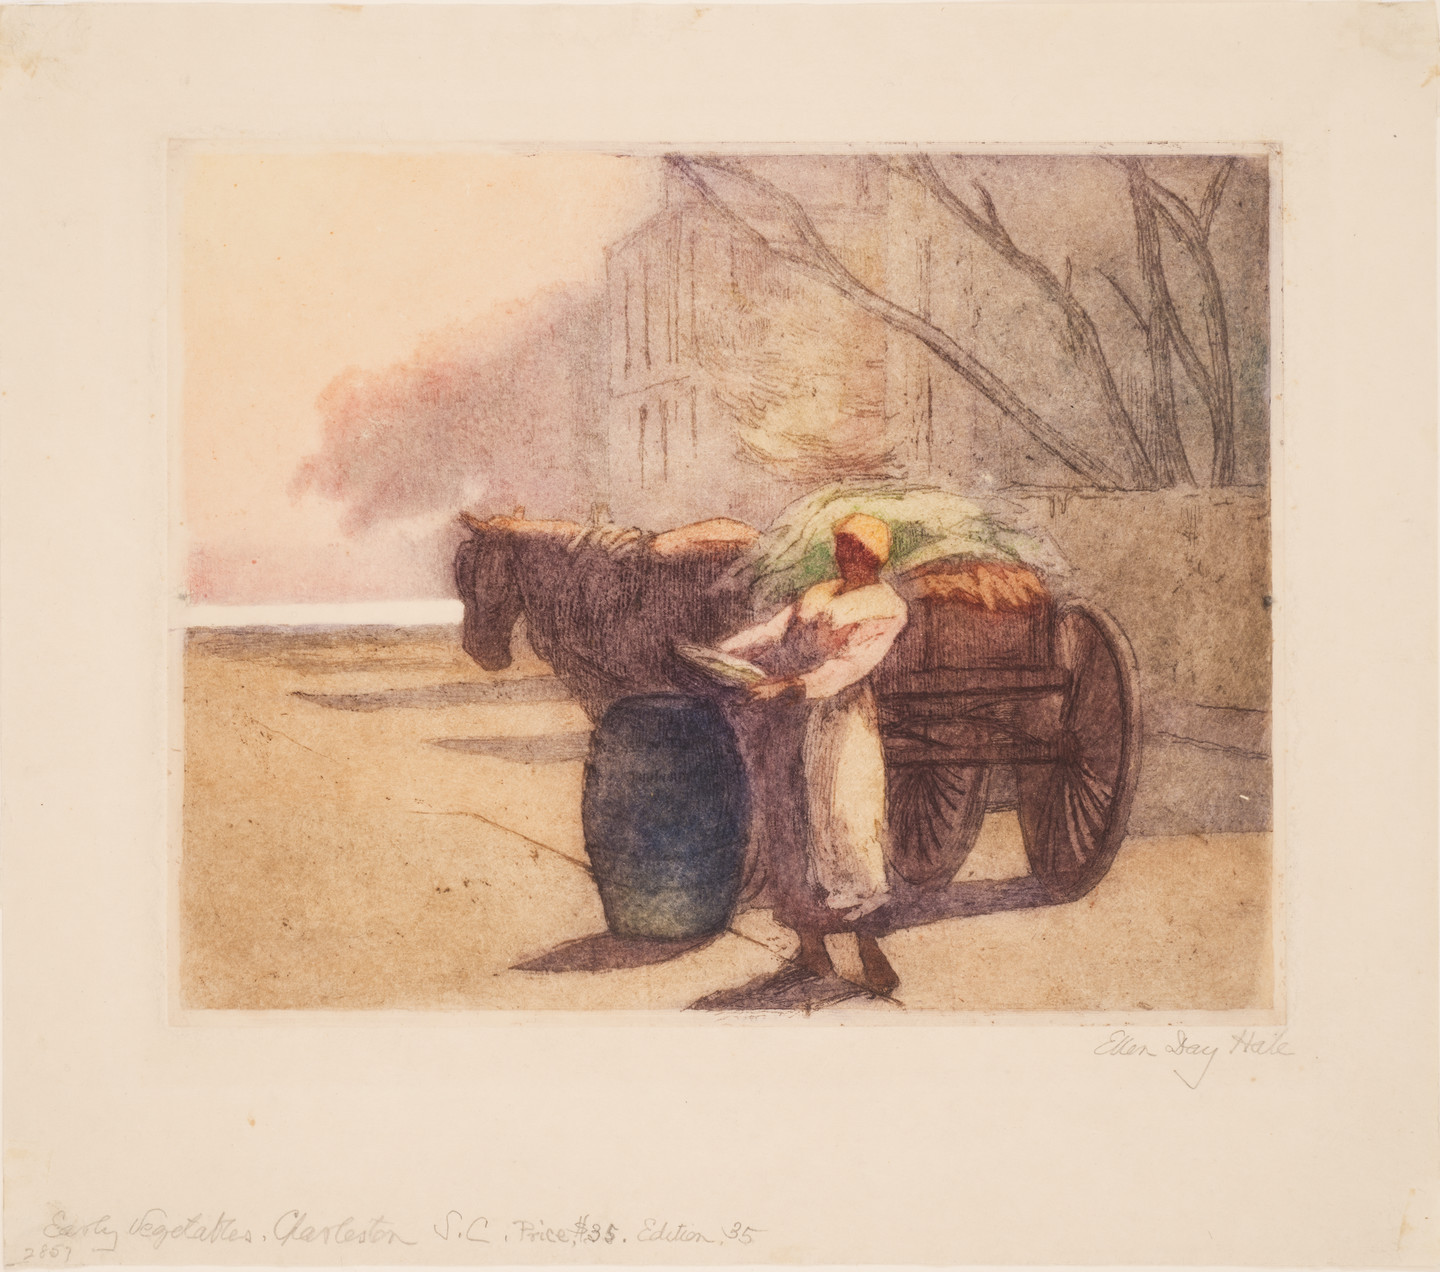 A warm-toned etching of a person wearing a light colored dress and dark apron unloading a horse drawn cart.